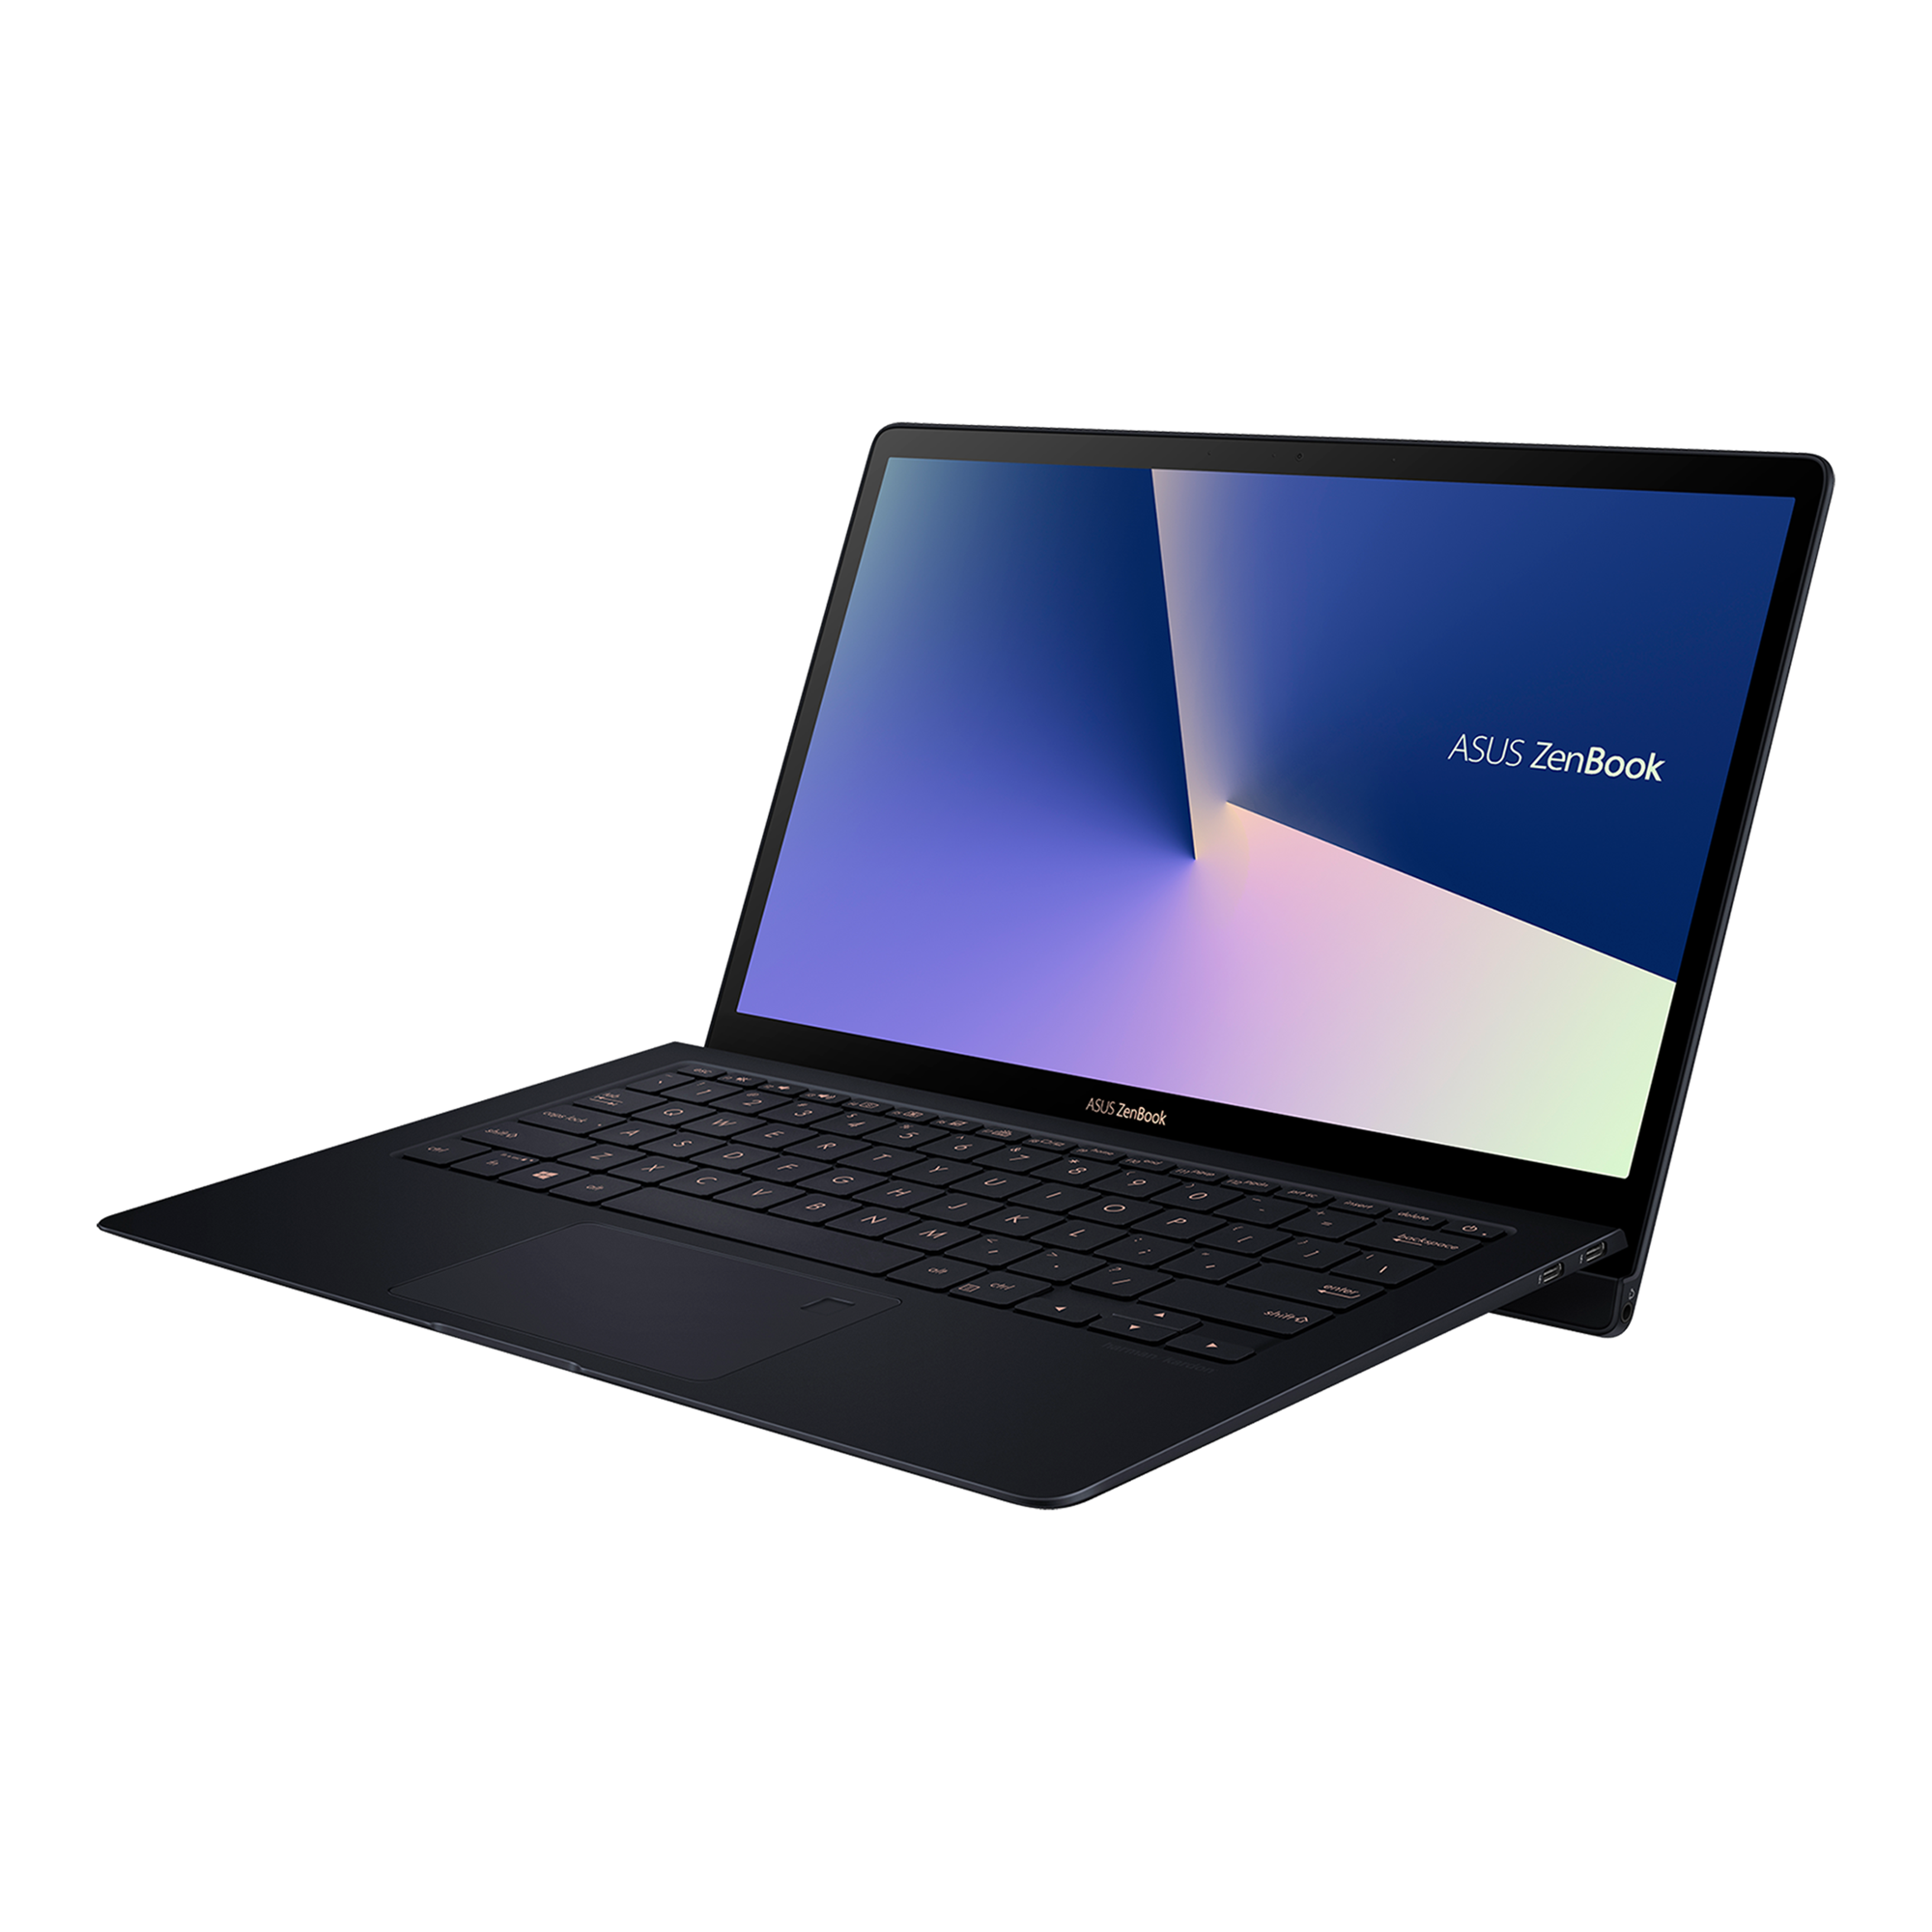 ASUS Zenbook S UX391｜Laptops For Home｜ASUS Canada